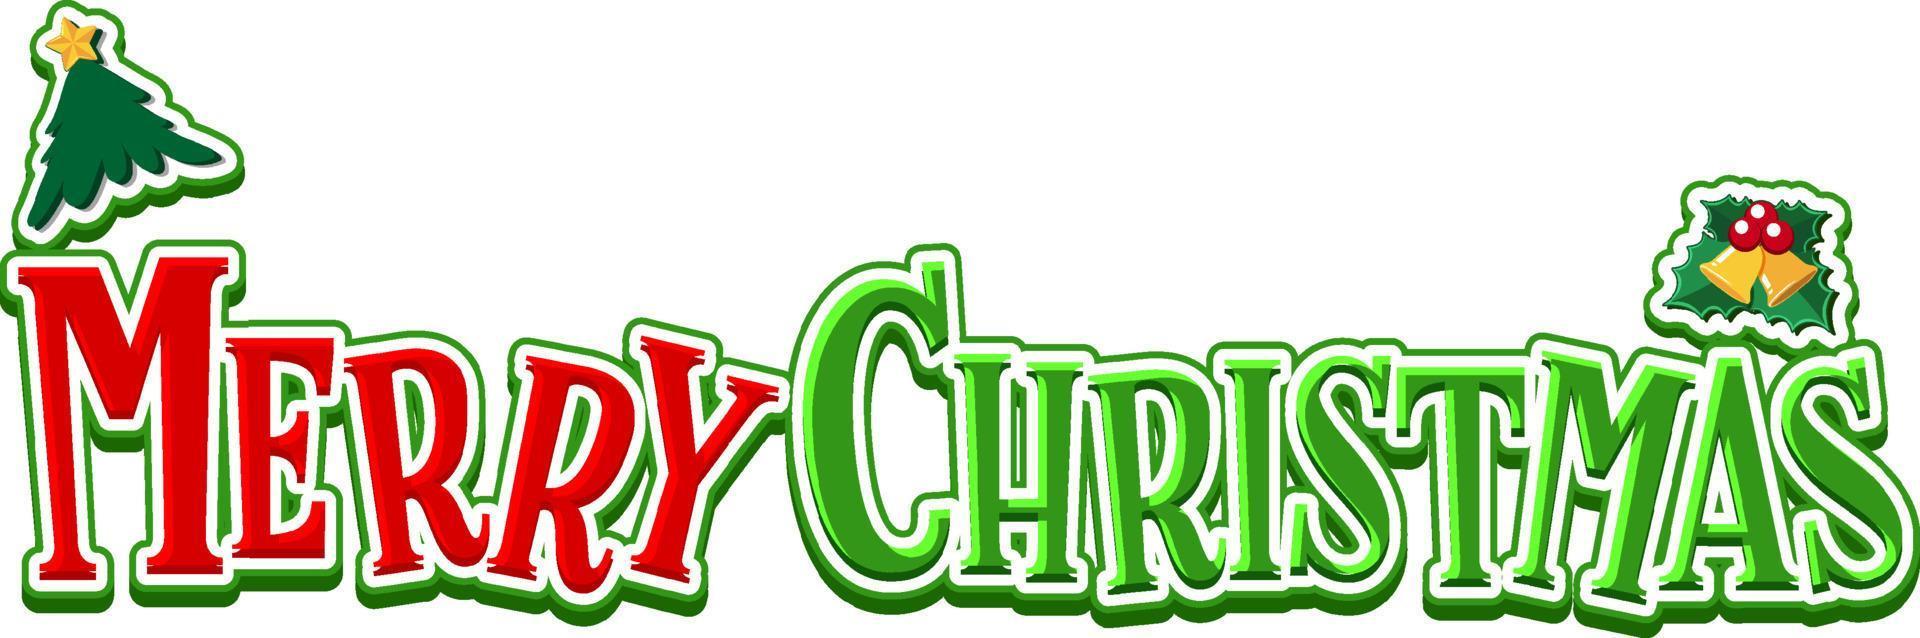 Merry Christmas text design on white background vector